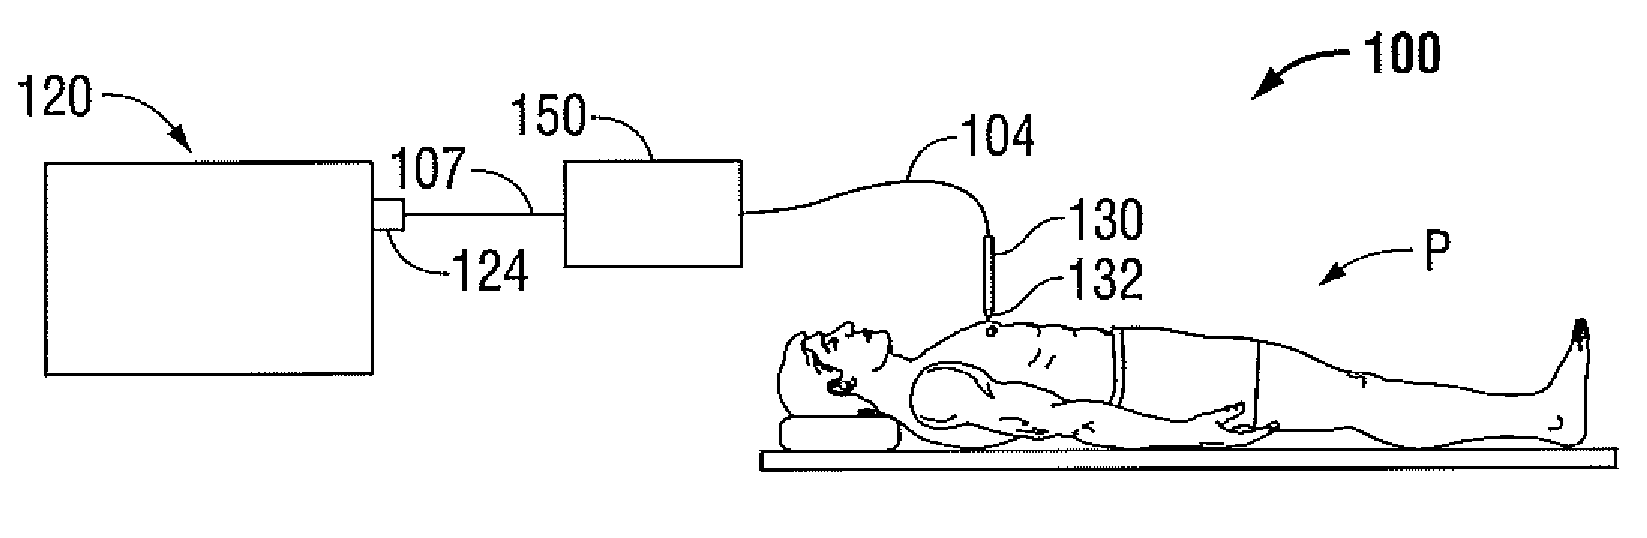 Tissue Ablation System with Energy Distribution